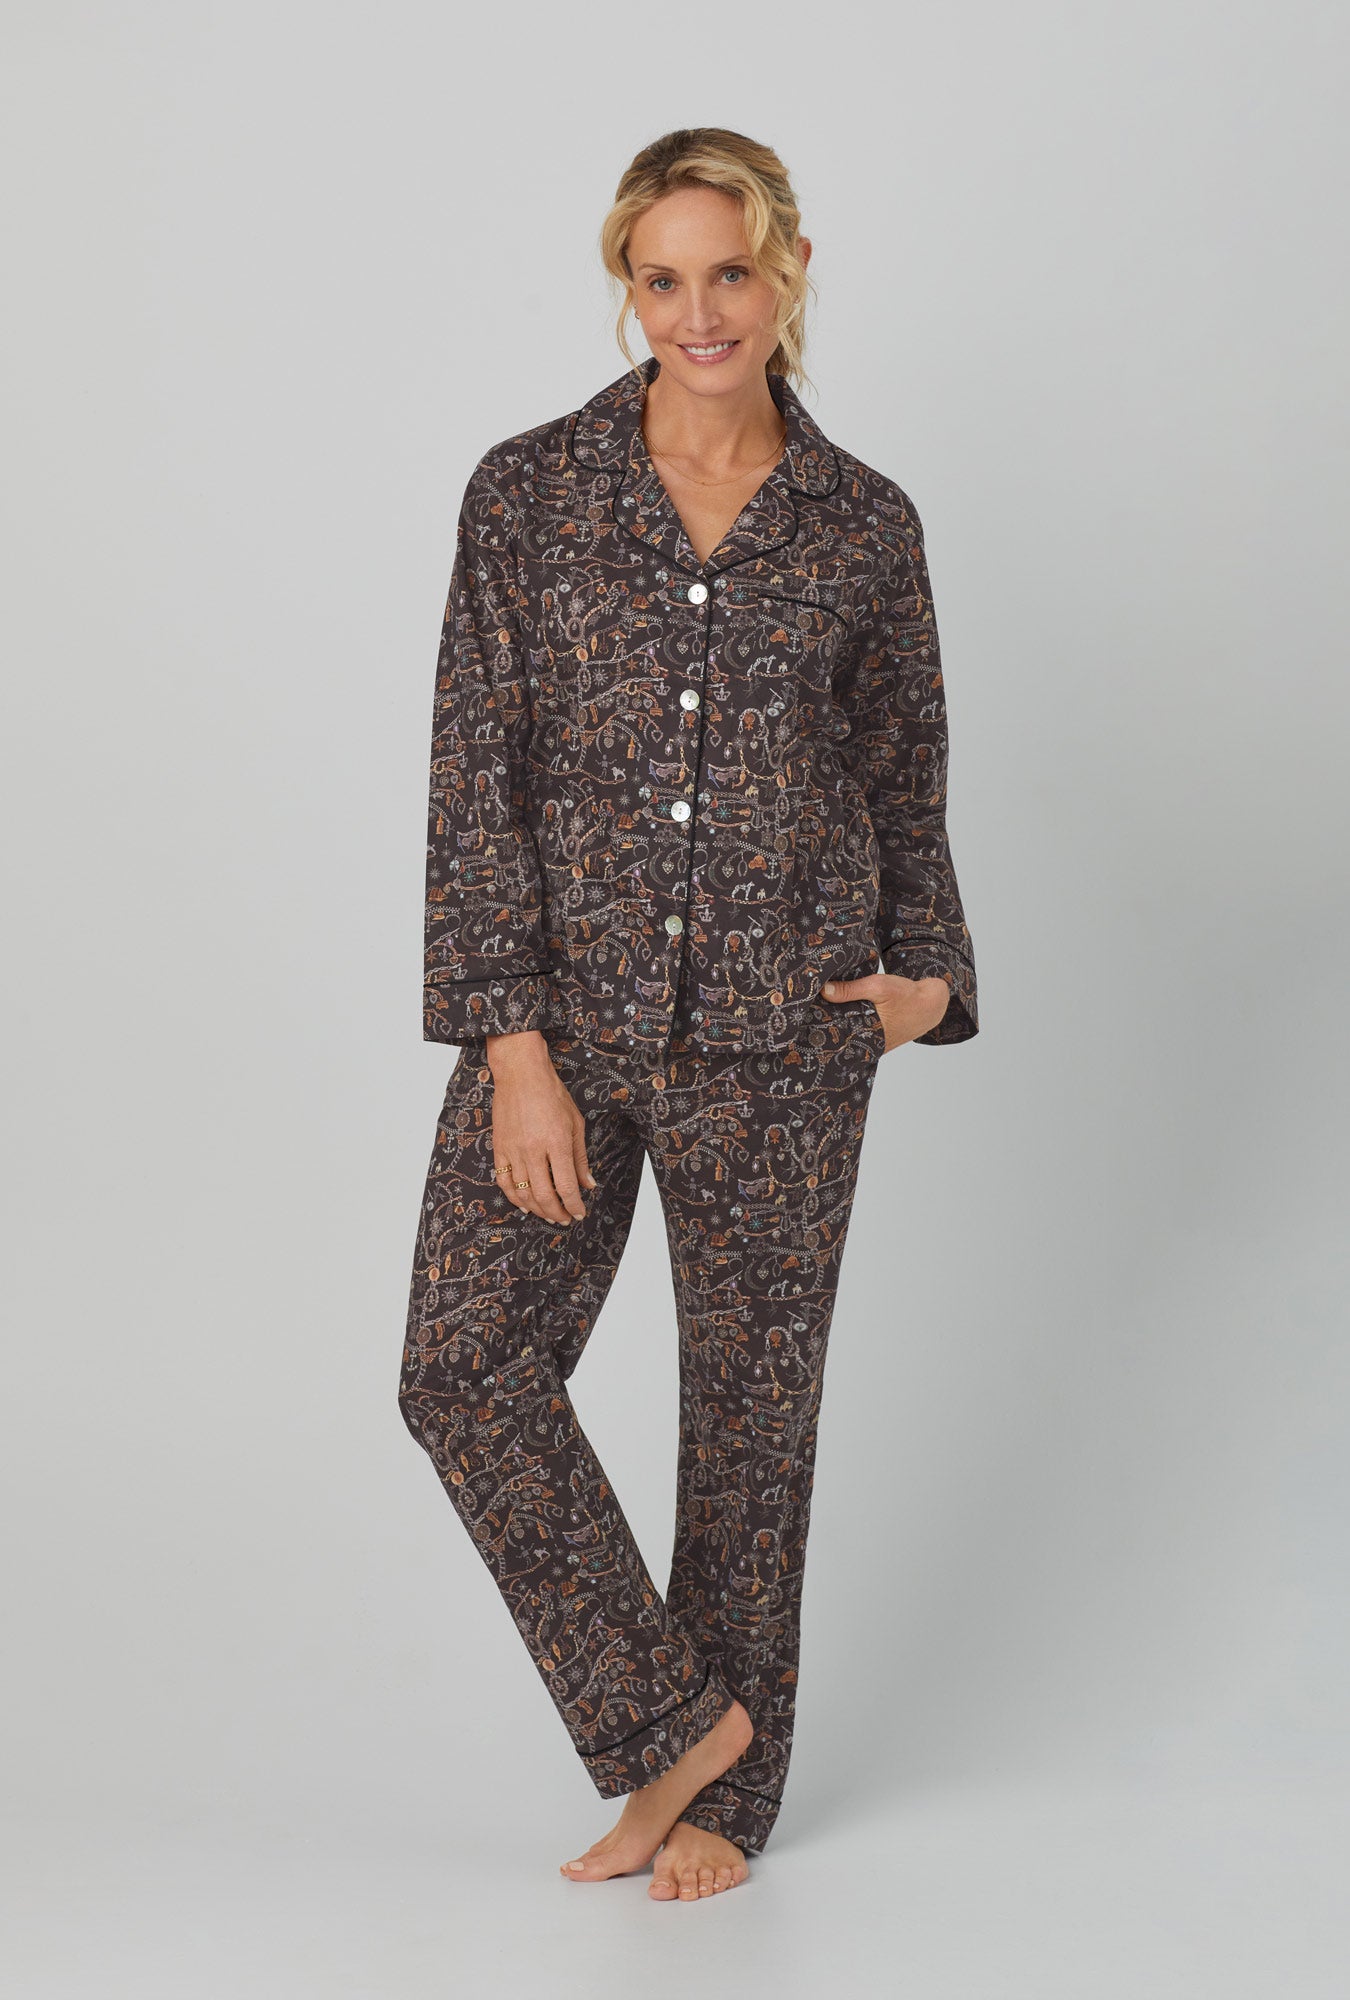 A lady wearing Long Sleeve Classic Woven Cotton Tana Lawn® PJ Set Made with Liberty Fabrics with Forever Heirloom print